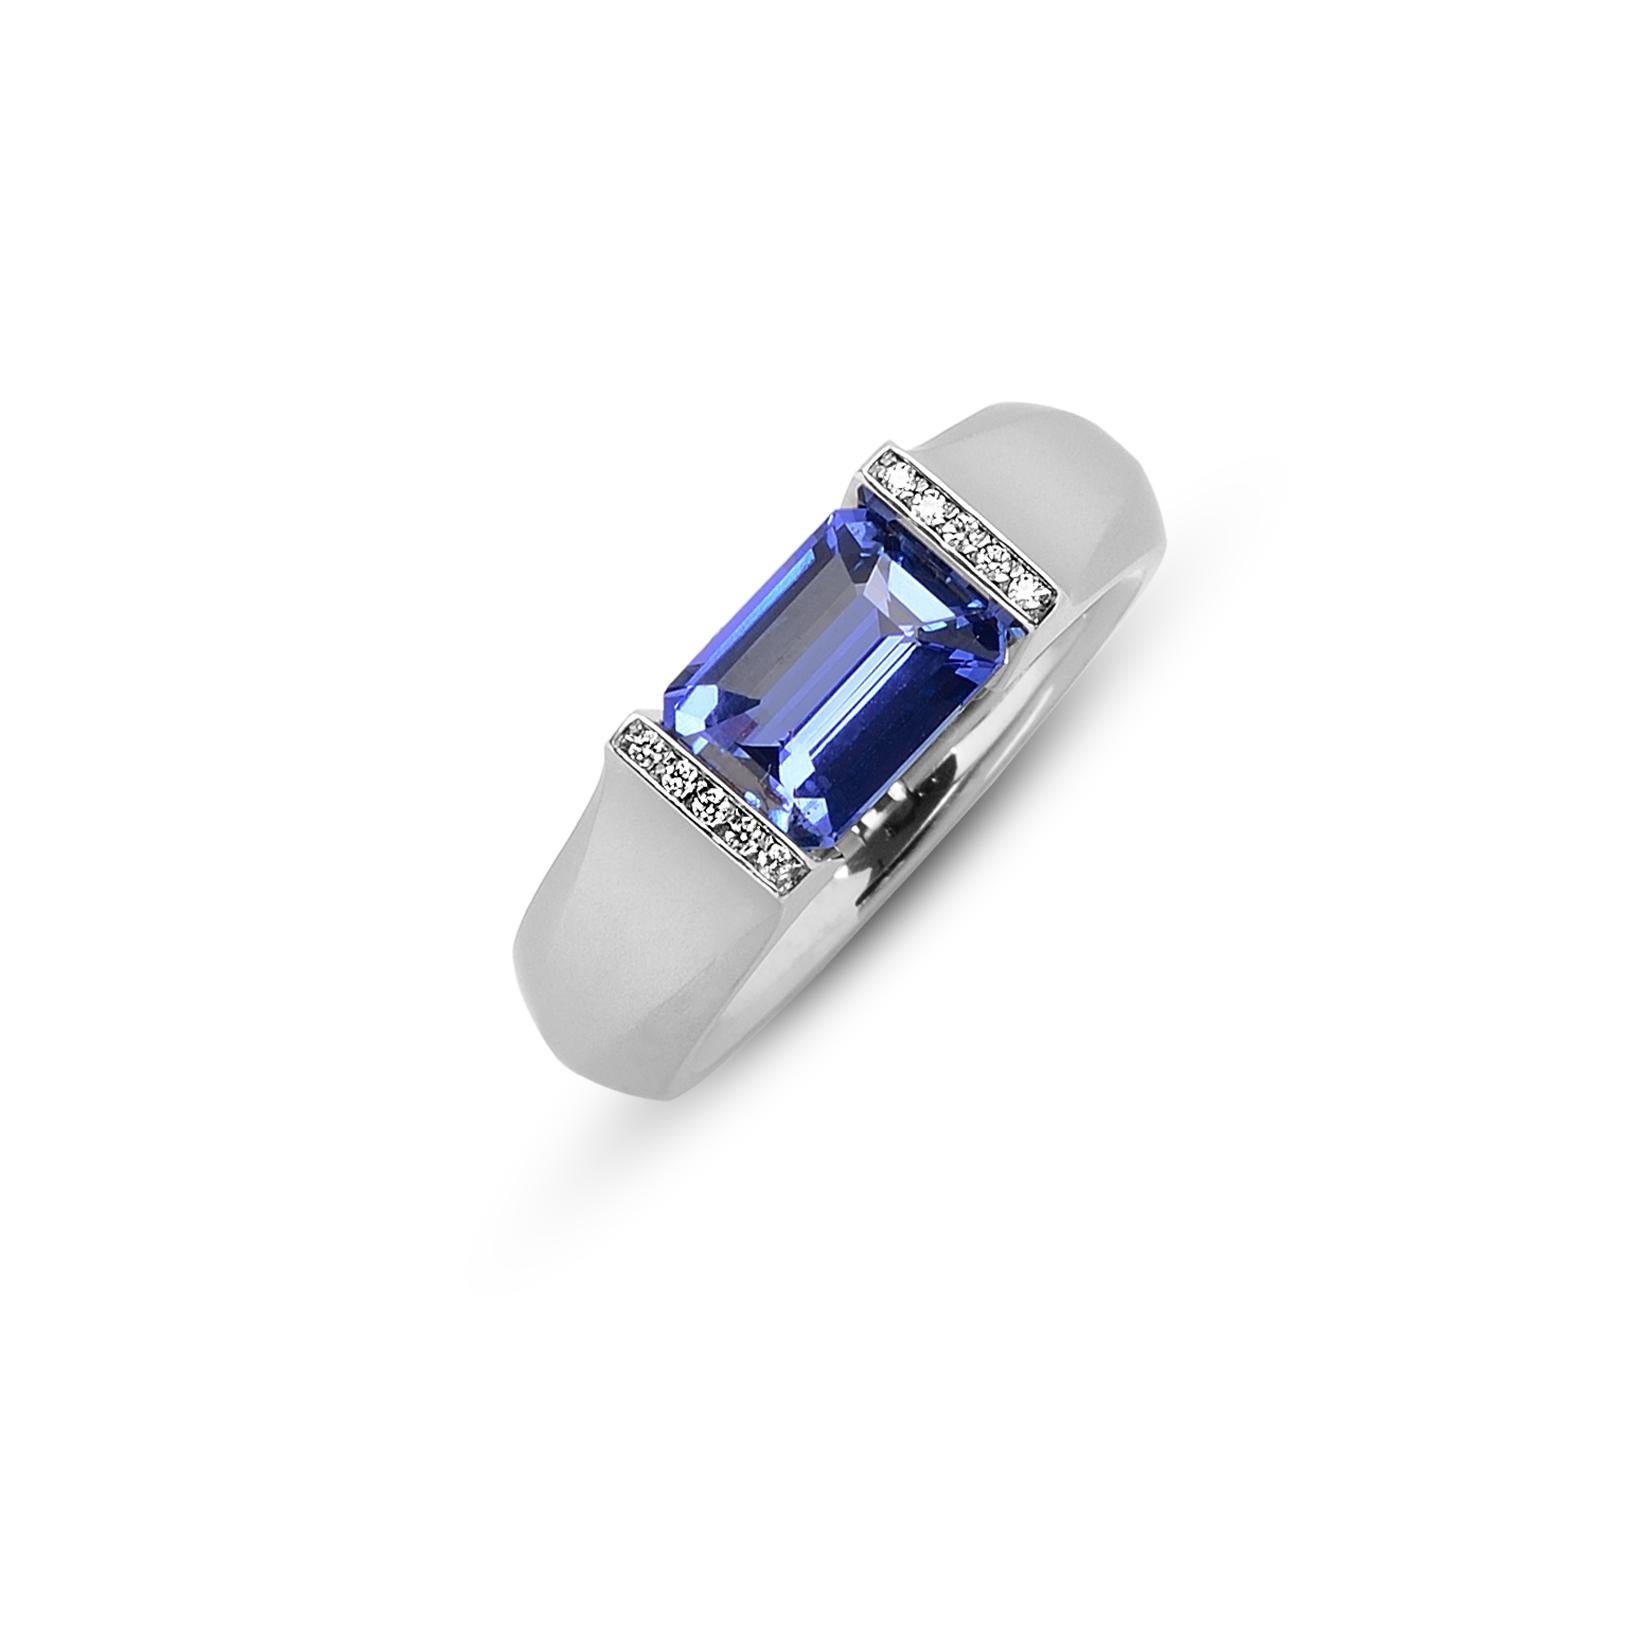 The Steven Kretchmer Softened Hard Omega Ring with a tension-set cornflower blue sapphire is handcrafted in platinum with a matte finish. The 2.33 ct. emerald cut sapphire is a saturated, traditional cornflower blue. The 